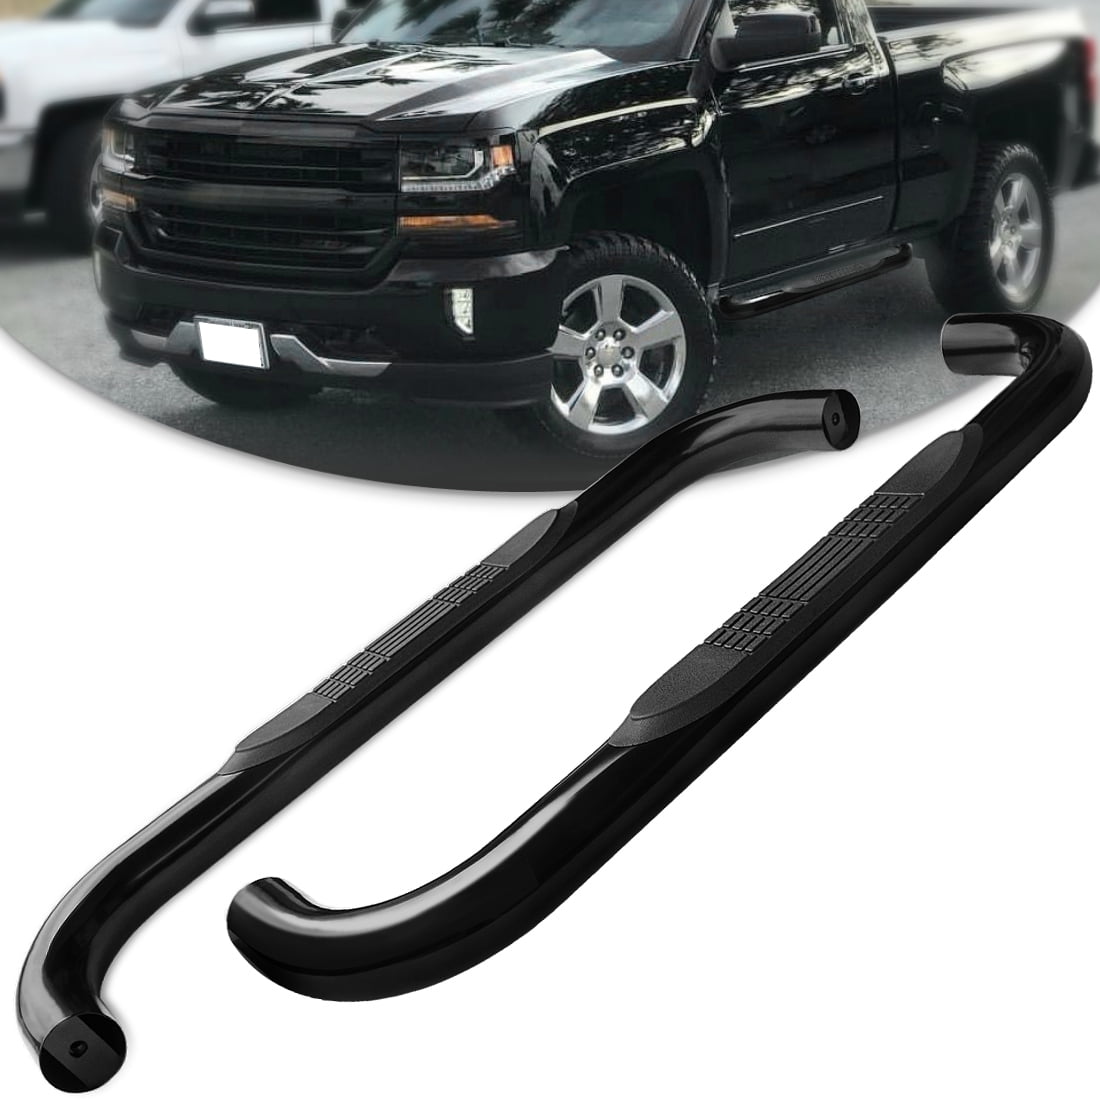 S.K Vincent A Pair of Running Boards for 07-18 Chevy Silverado 1500 Extend/Double Cab Pickup,Wheel to Wheel,3 Inches,Drop Steps Style，nerf Bars Side Steps Side Bar